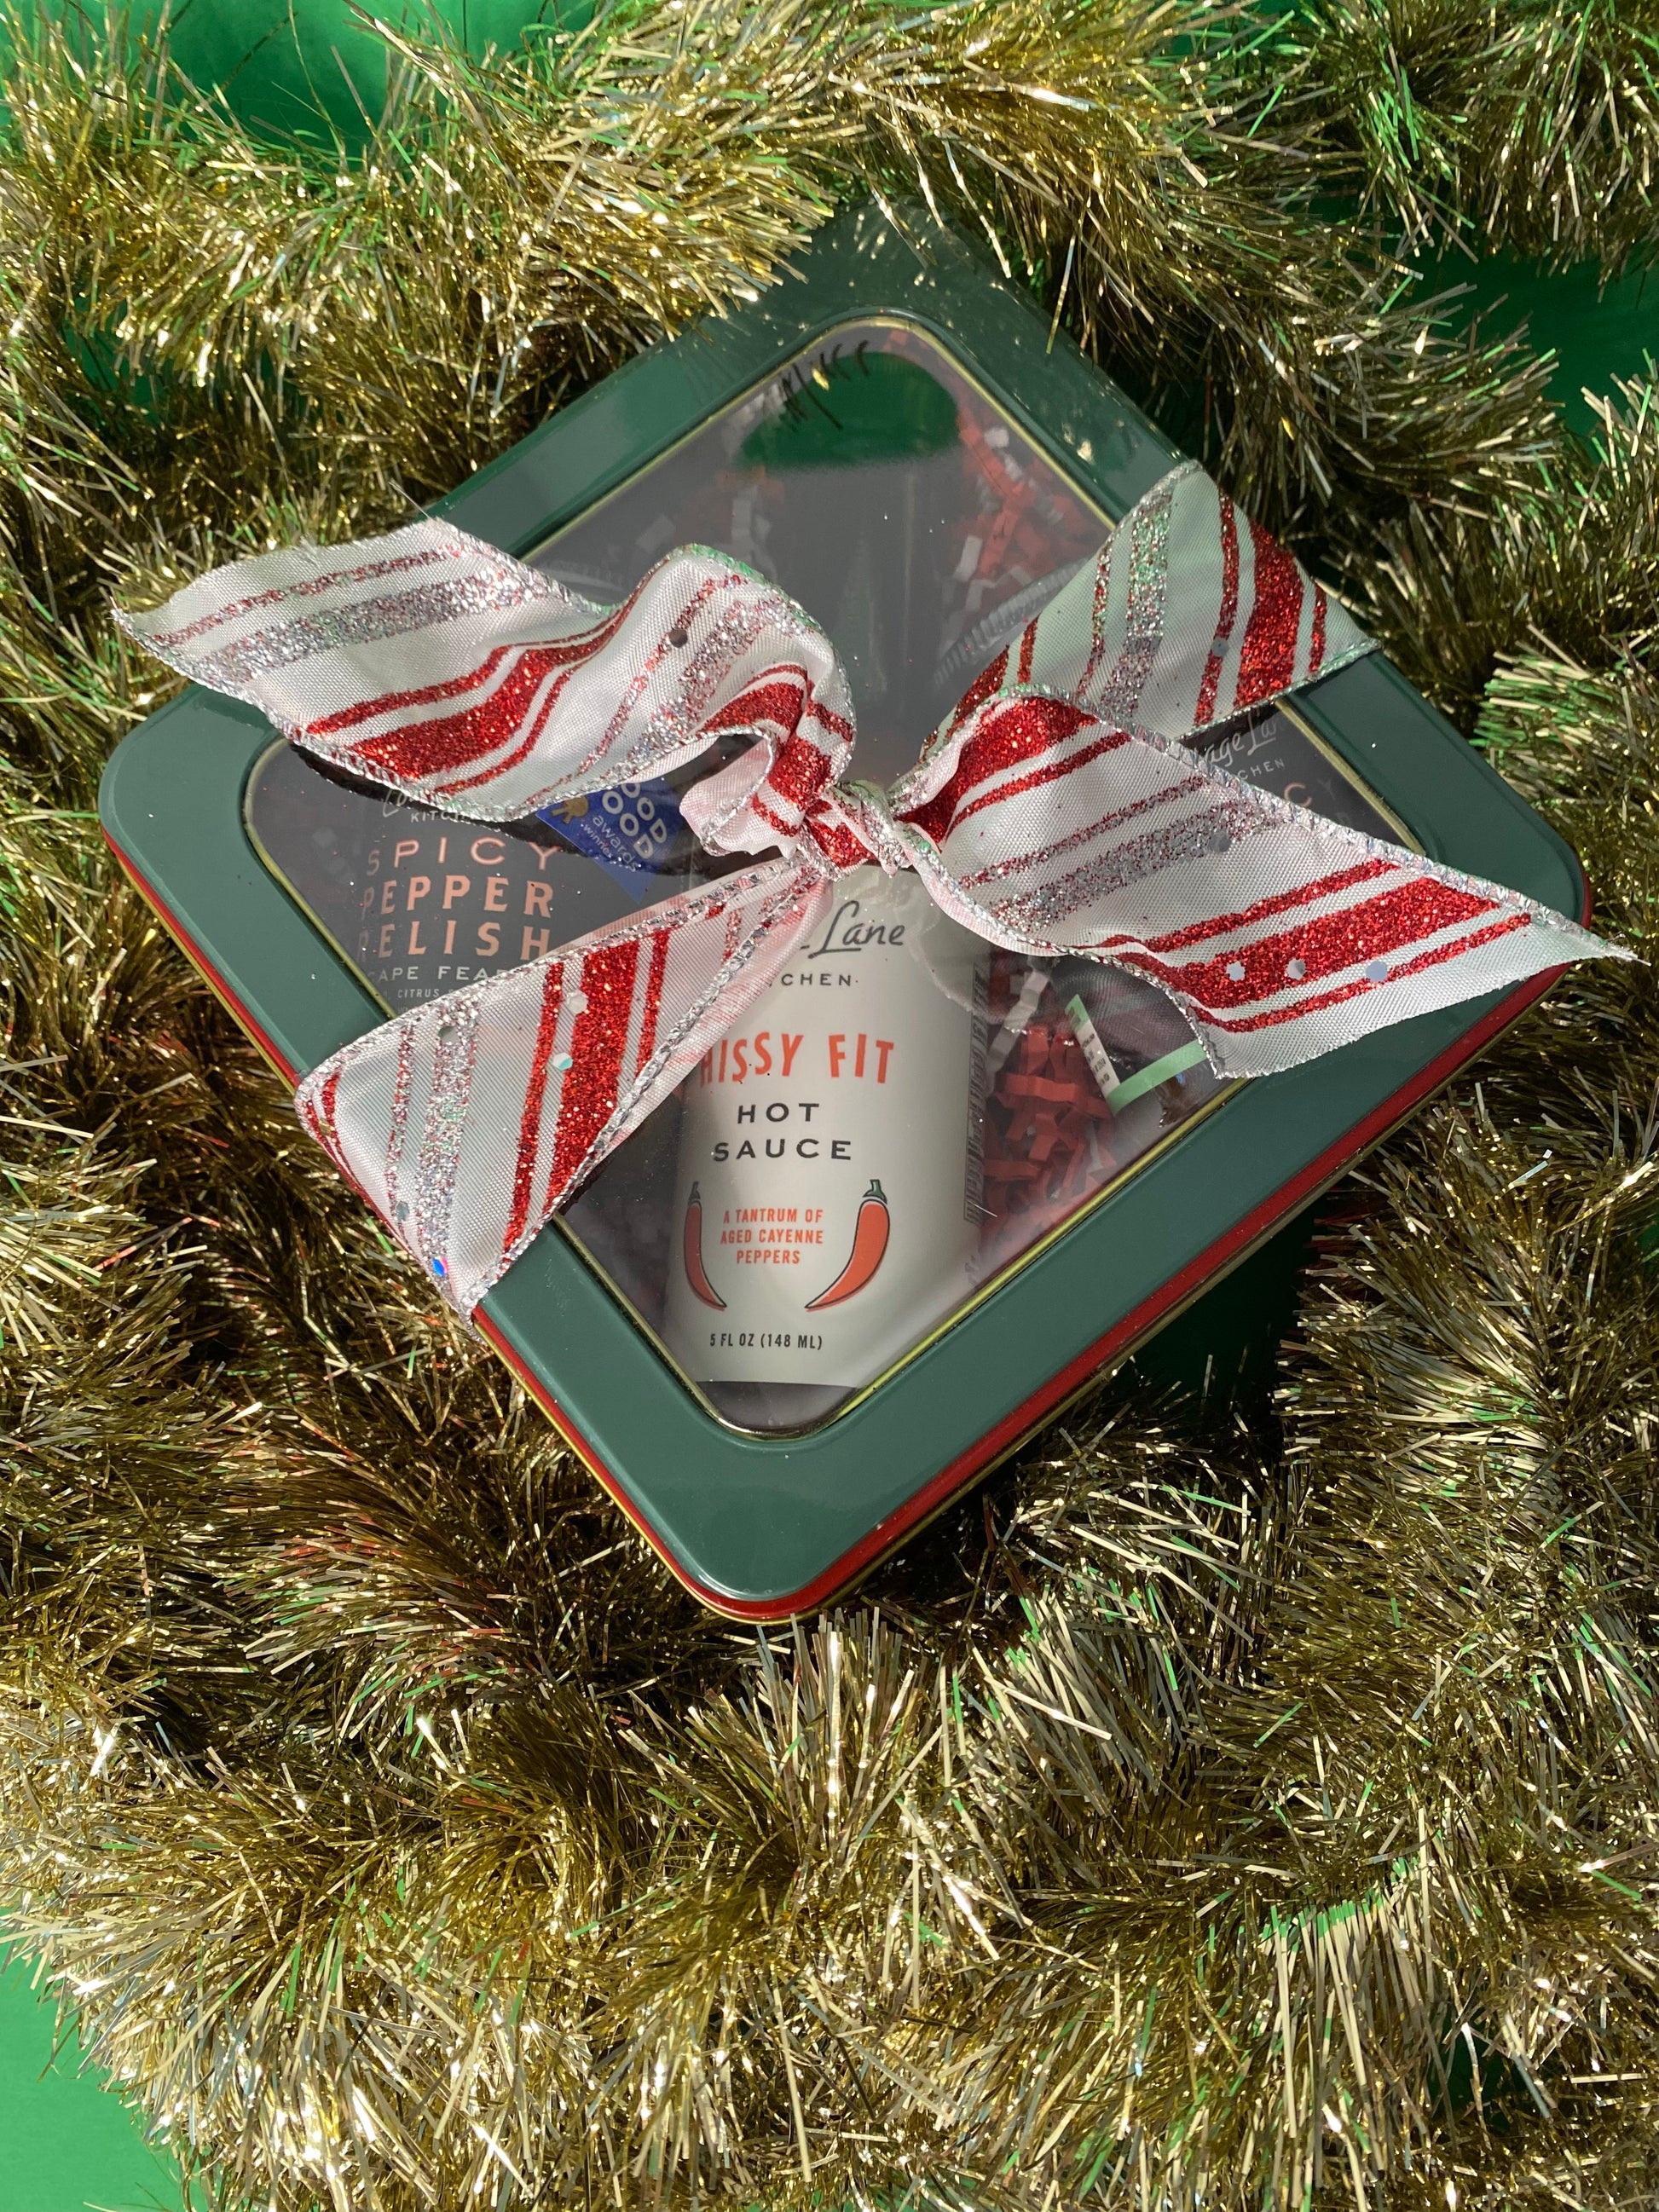 Holiday gift set of Cottage Lane Kitchen products wrapped in a box with a red and white ribbon surrounded by tinsel